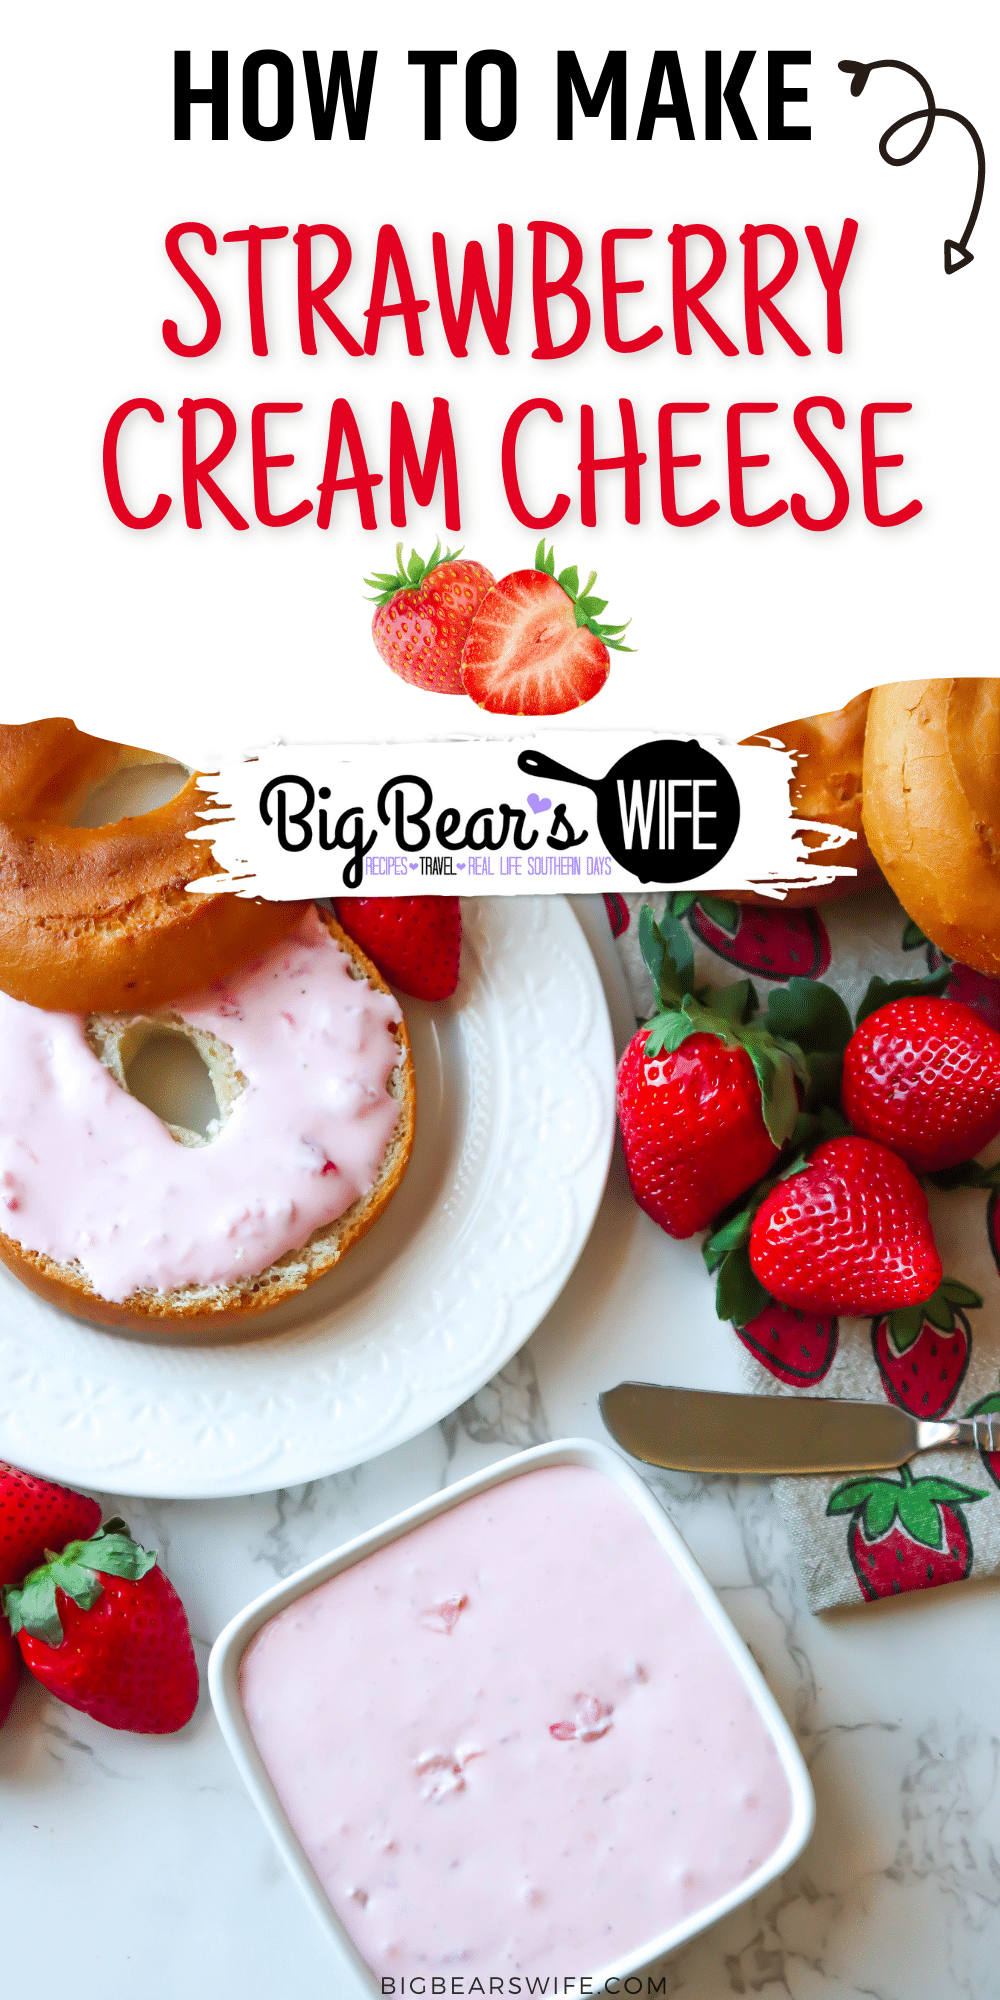 Homemade Strawberry Cream Cheese made with fresh strawberries and smooth cream cheese is super easy to make yourself. It's great as a spread for bagels and toast or as a dip for fruits. Perfect for brunch, Valentine’s Day breakfast or Mother Day Lunch. via @bigbearswife